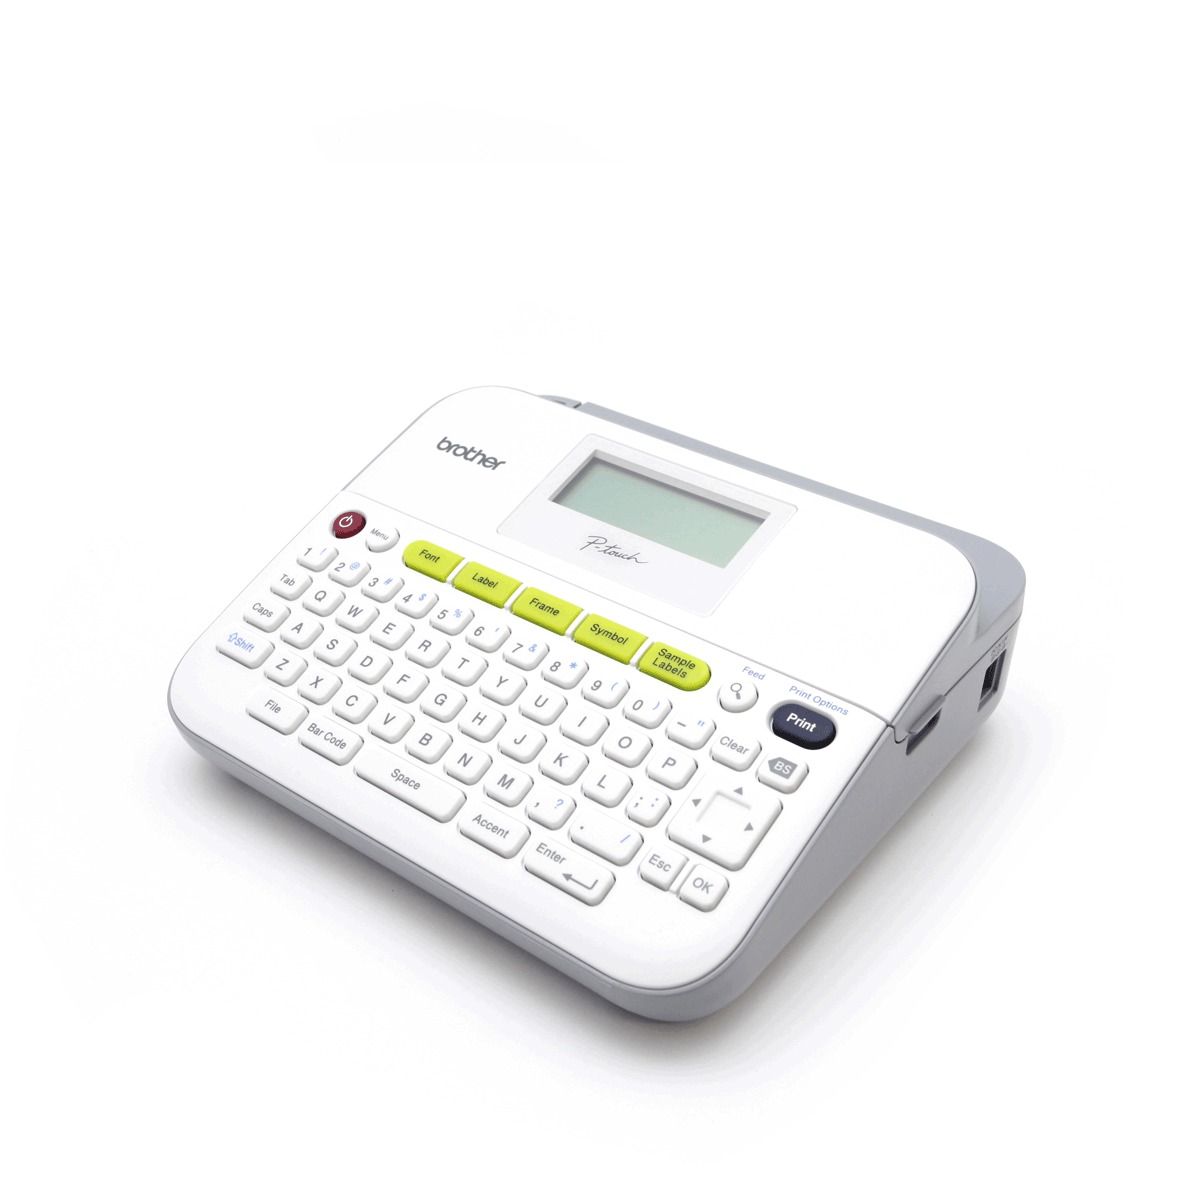 ELECTRONICO BROTHER PT-D400 (BLANCO) | Office Depot Mexico